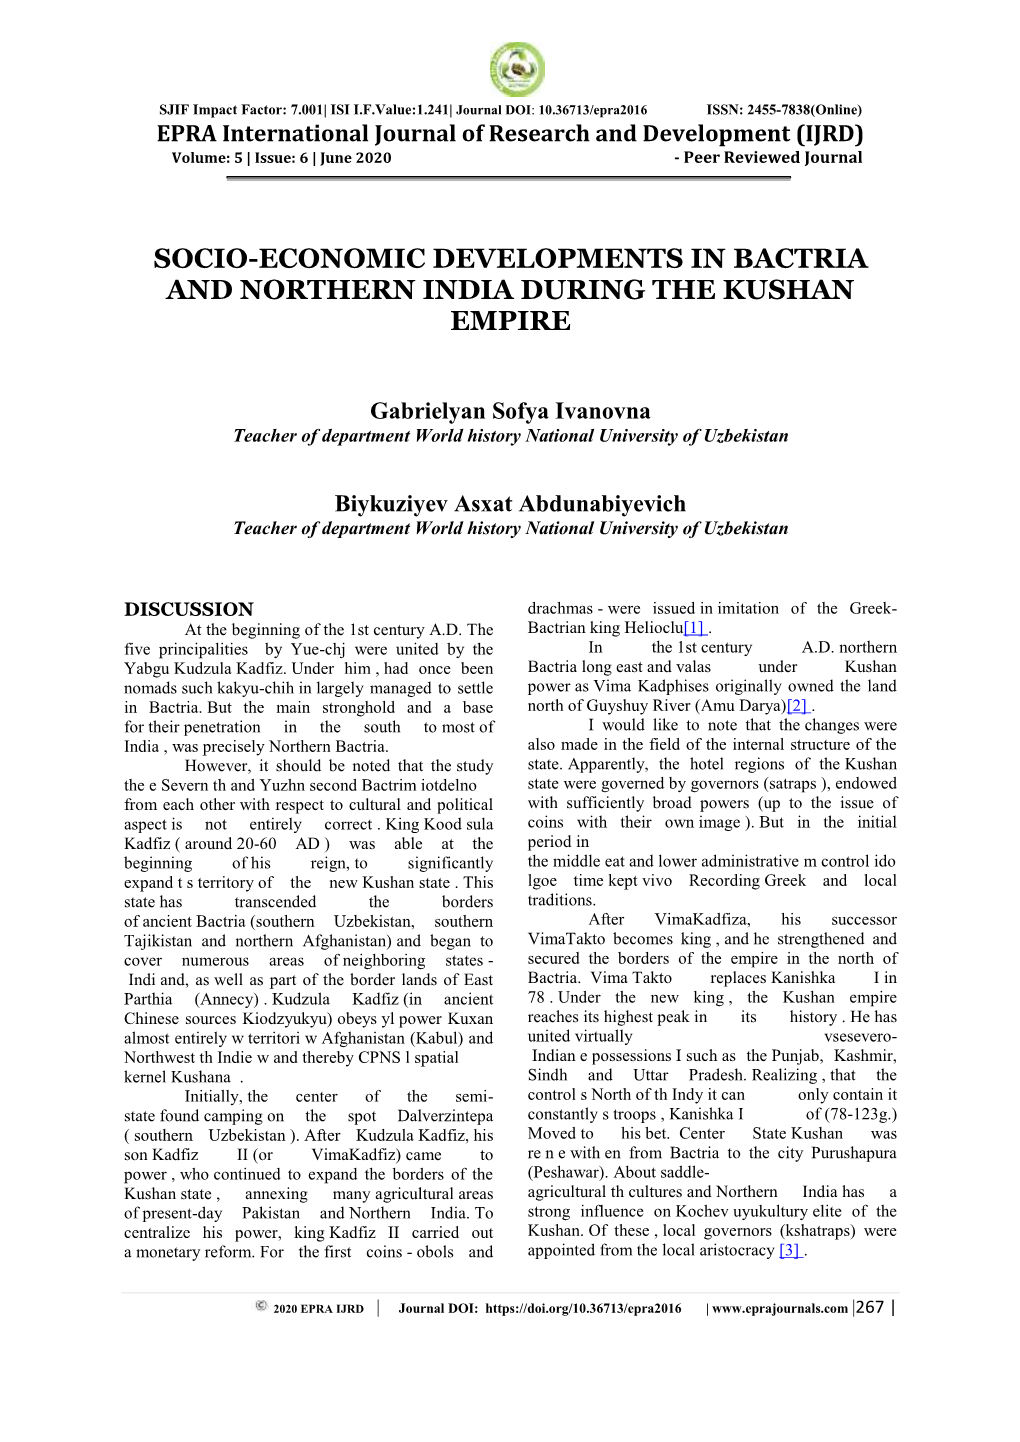 Socio-Economic Developments in Bactria and Northern India During the Kushan Empire